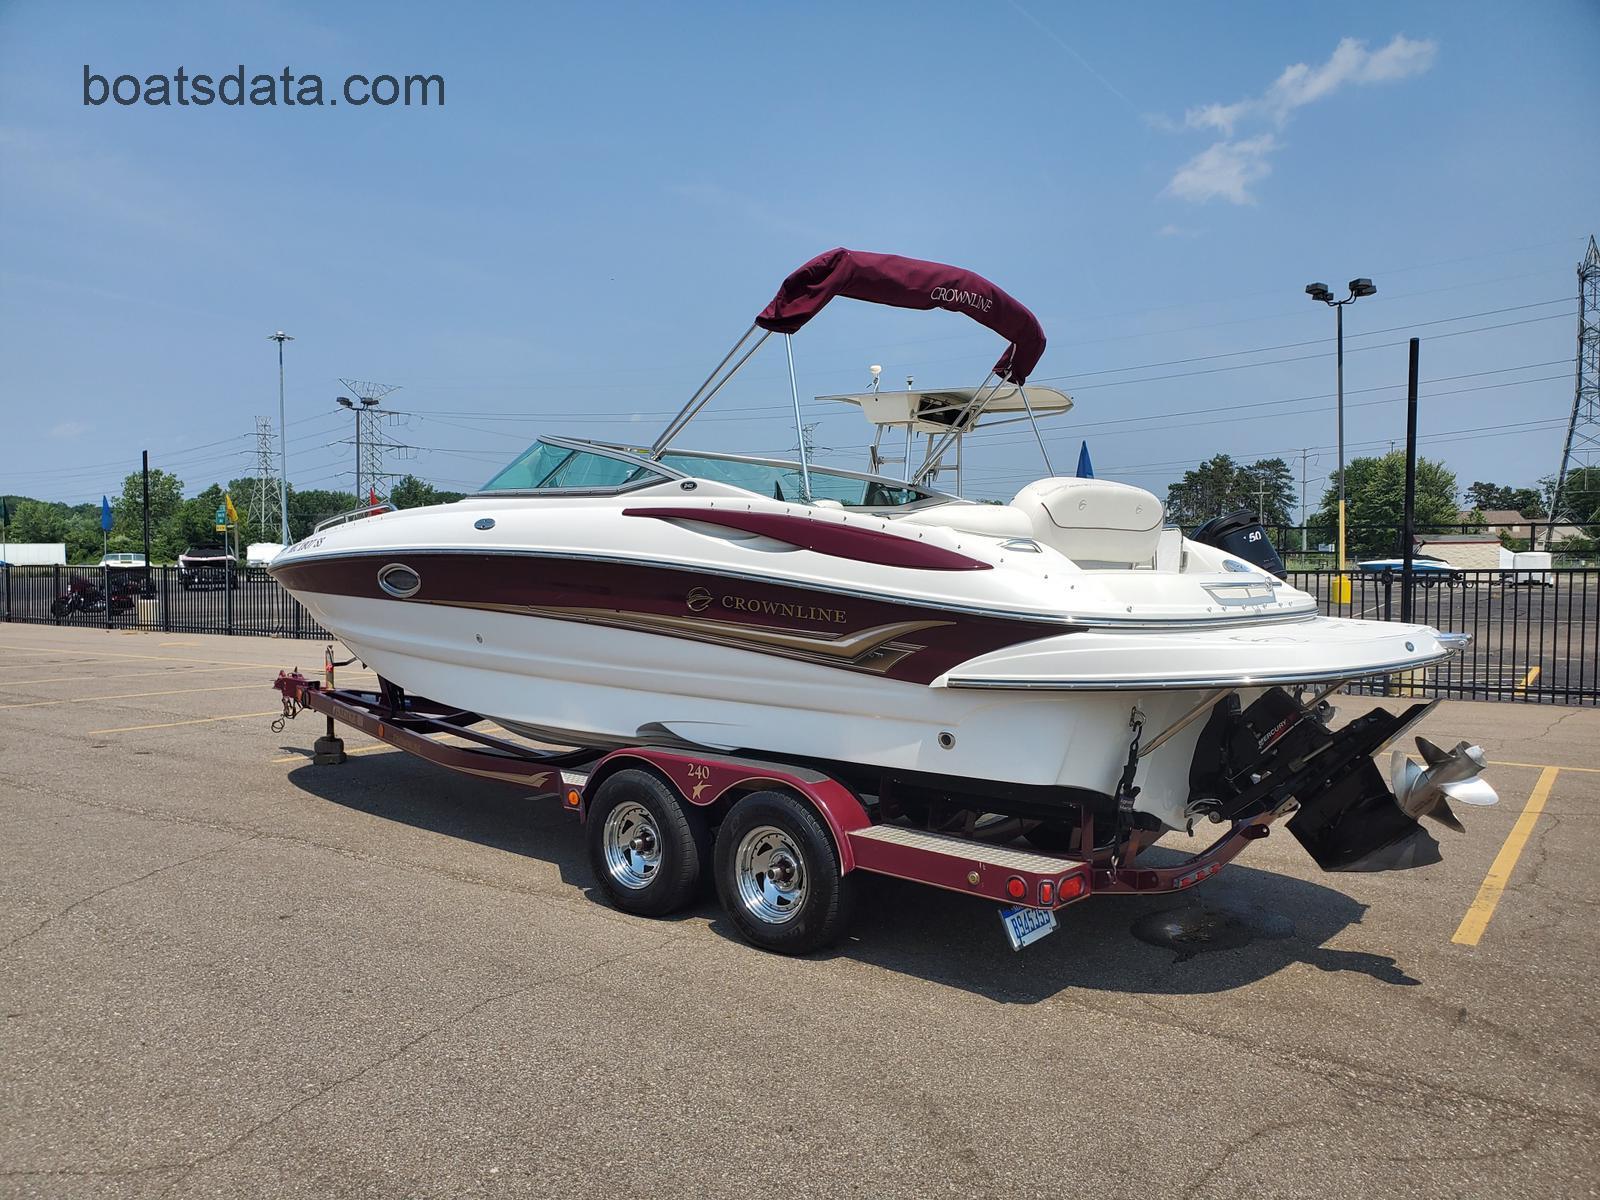 Crownline Deck Boat 240 EX tv detailed specifications and features